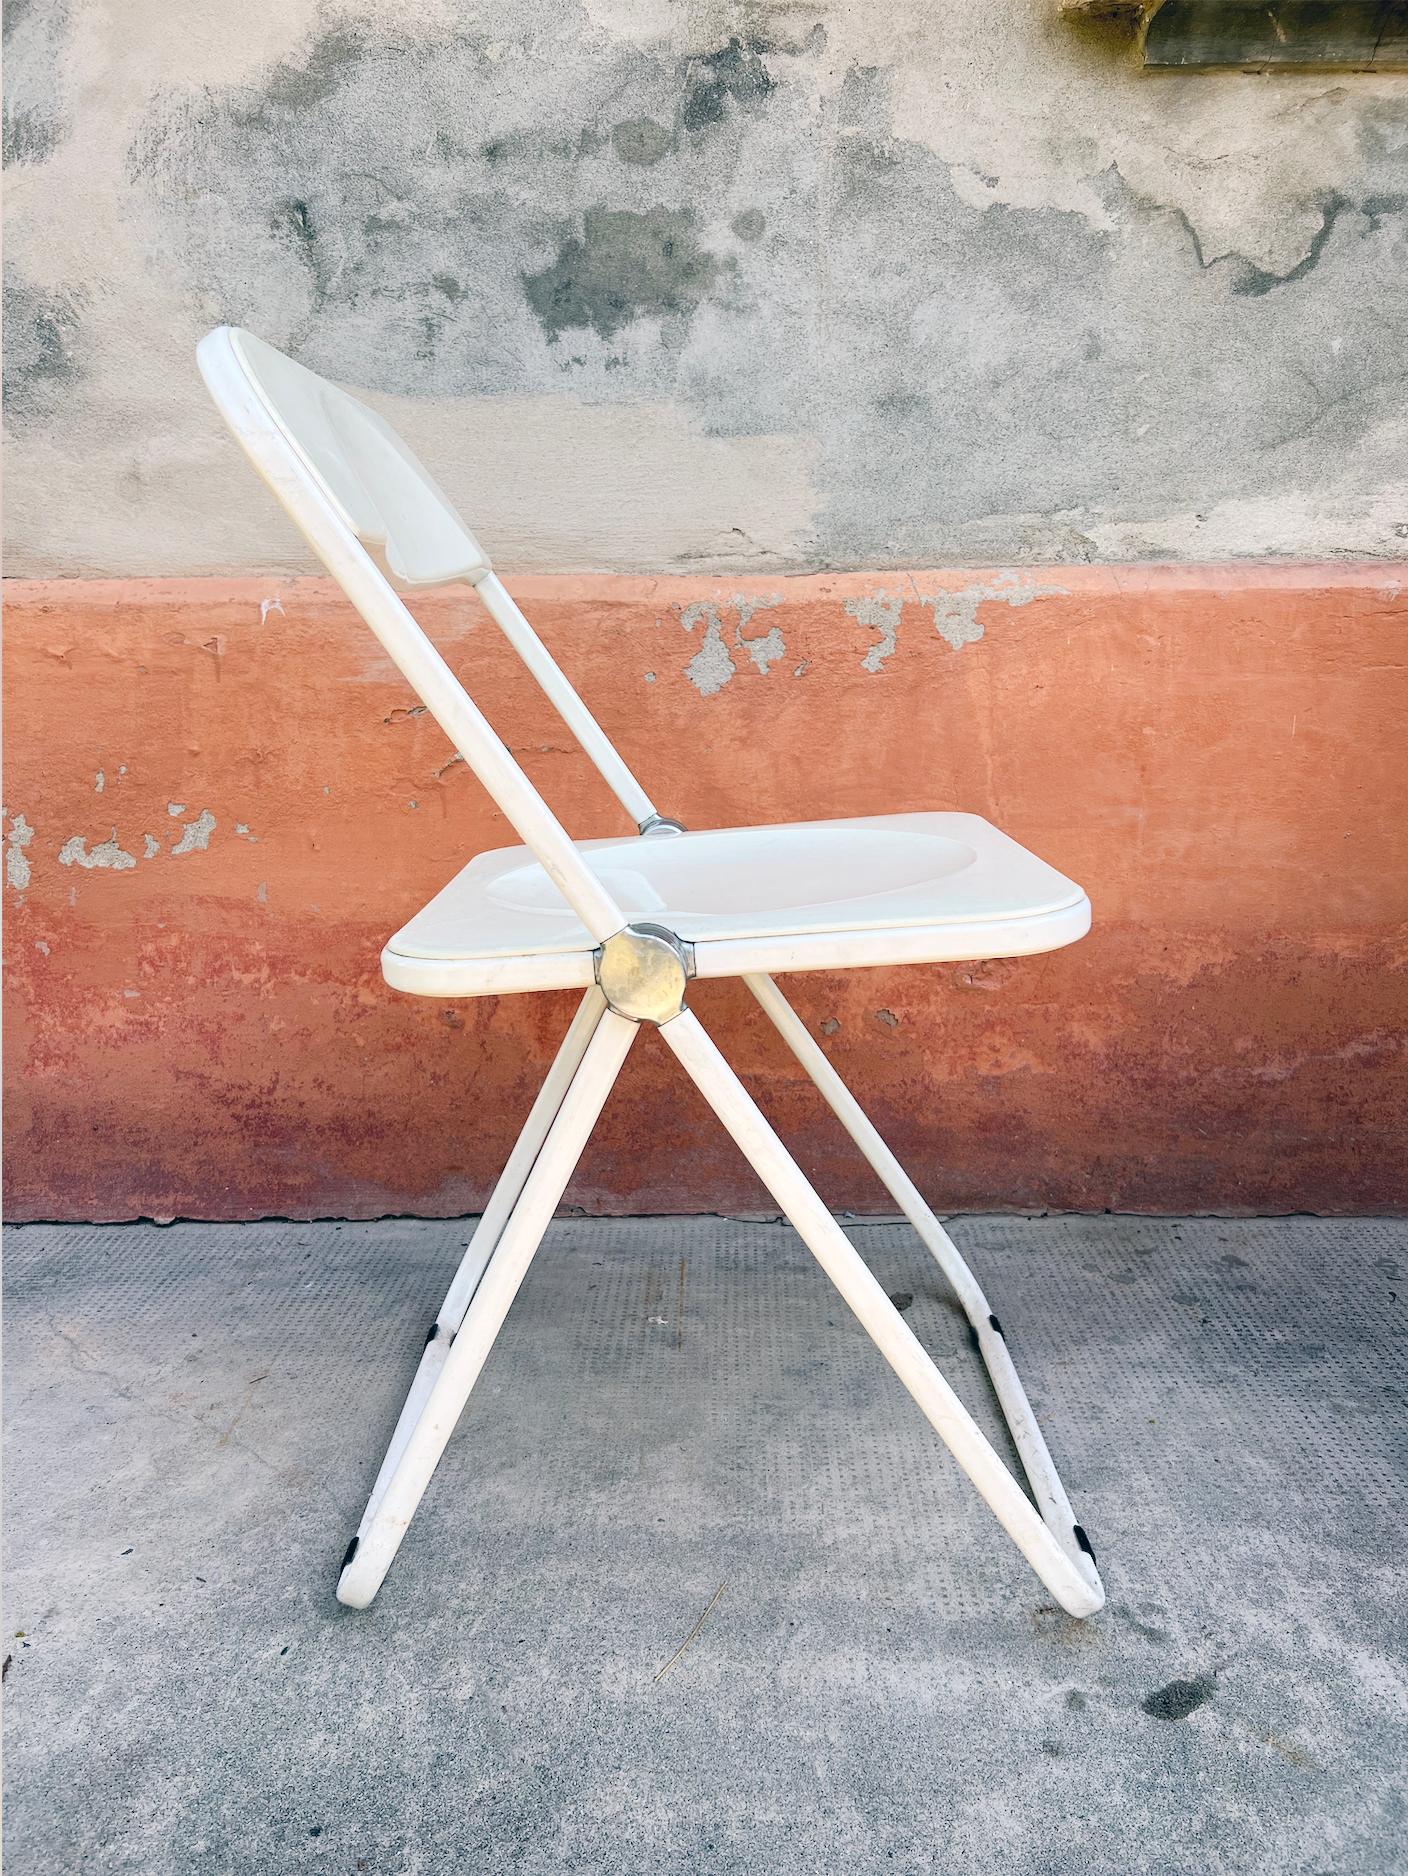 The symbol of a new era focused on plastic:    this is how the 1967 plia chair was received when it was published at the Milan Furniture Fair.  .

With the Plia folding chair,  the designer Giancarlo Piretti  revolutionized the concept of a folding